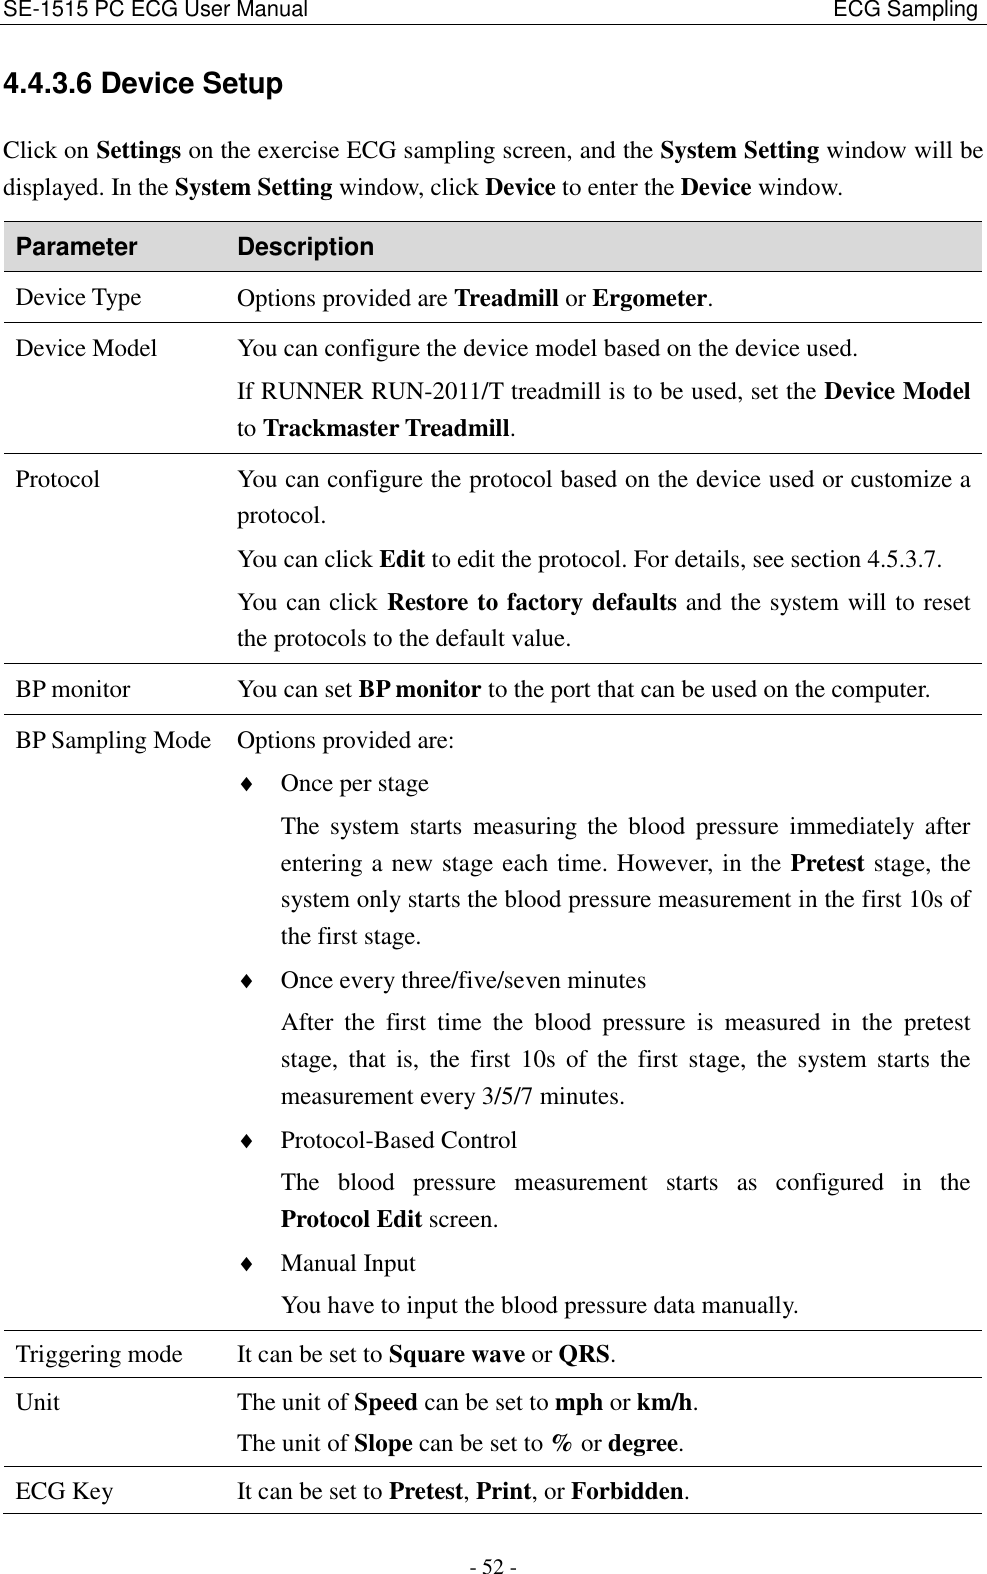 SE-1515 PC ECG User Manual                                                                                              ECG Sampling - 52 - 4.4.3.6 Device Setup Click on Settings on the exercise ECG sampling screen, and the System Setting window will be displayed. In the System Setting window, click Device to enter the Device window. Parameter Description Device Type Options provided are Treadmill or Ergometer. Device Model You can configure the device model based on the device used. If RUNNER RUN-2011/T treadmill is to be used, set the Device Model to Trackmaster Treadmill. Protocol You can configure the protocol based on the device used or customize a protocol. You can click Edit to edit the protocol. For details, see section 4.5.3.7. You can click Restore to factory defaults and the system will to reset the protocols to the default value. BP monitor You can set BP monitor to the port that can be used on the computer. BP Sampling Mode  Options provided are:  Once per stage The  system  starts  measuring the  blood  pressure  immediately  after entering a new stage each time. However, in the Pretest stage, the system only starts the blood pressure measurement in the first 10s of the first stage.  Once every three/five/seven minutes After  the  first  time  the  blood  pressure  is  measured  in  the  pretest stage,  that  is,  the  first  10s  of  the  first  stage, the  system  starts  the measurement every 3/5/7 minutes.  Protocol-Based Control The  blood  pressure  measurement  starts  as  configured  in  the Protocol Edit screen.  Manual Input You have to input the blood pressure data manually. Triggering mode It can be set to Square wave or QRS. Unit The unit of Speed can be set to mph or km/h. The unit of Slope can be set to % or degree. ECG Key It can be set to Pretest, Print, or Forbidden. 